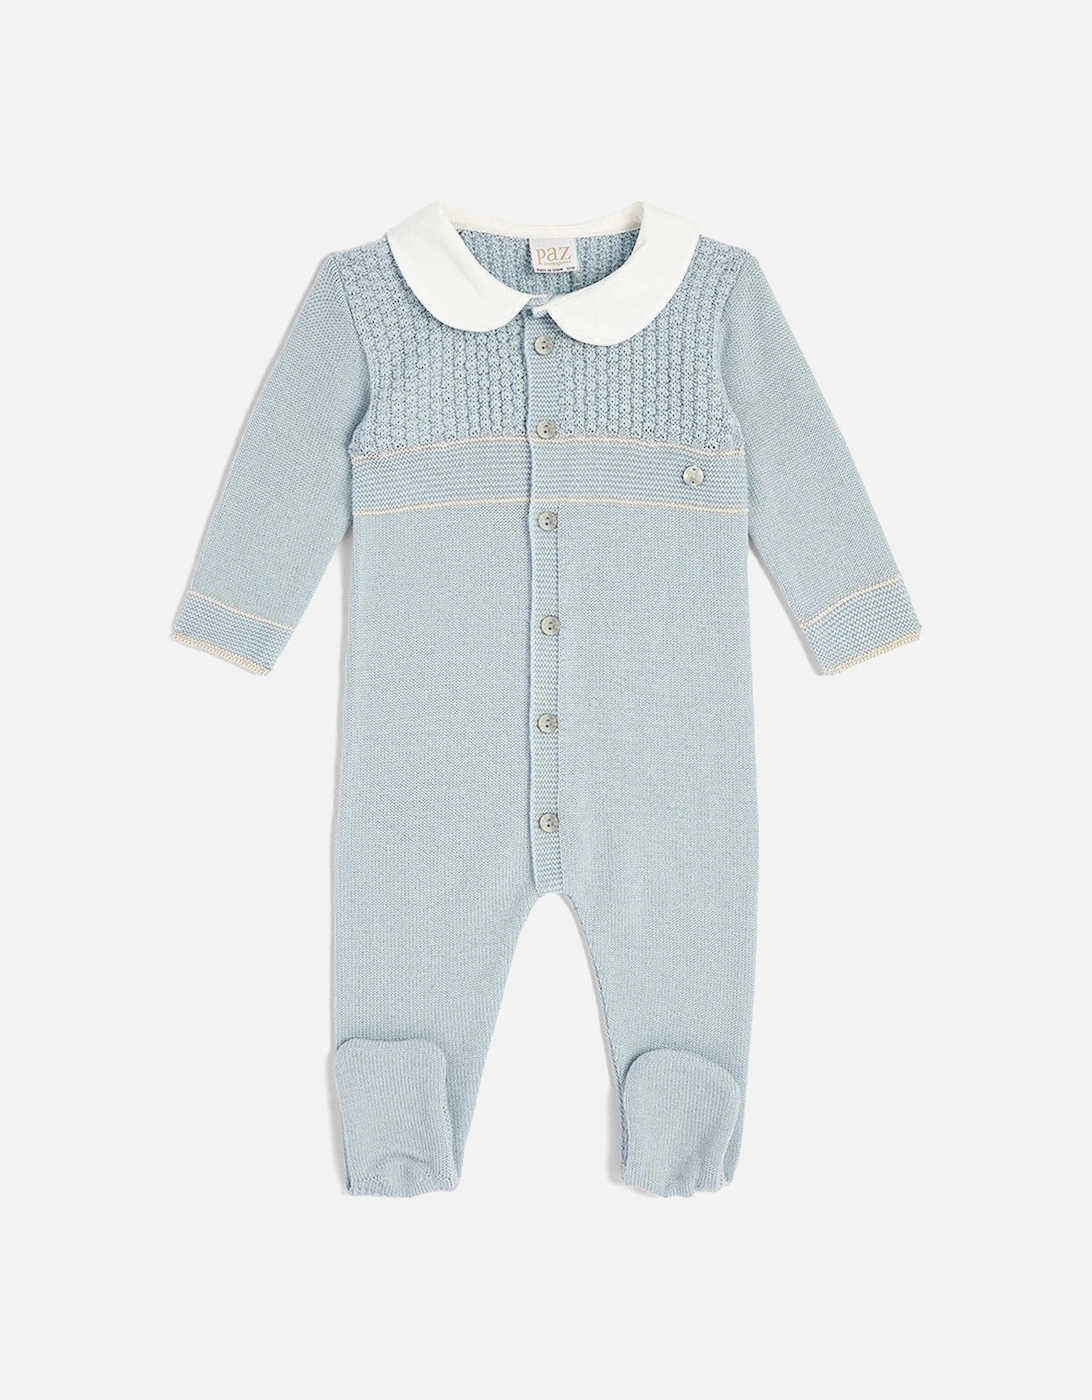 Paz Rodriguez Baby Unisex Knitted Romper Blue, 4 of 3